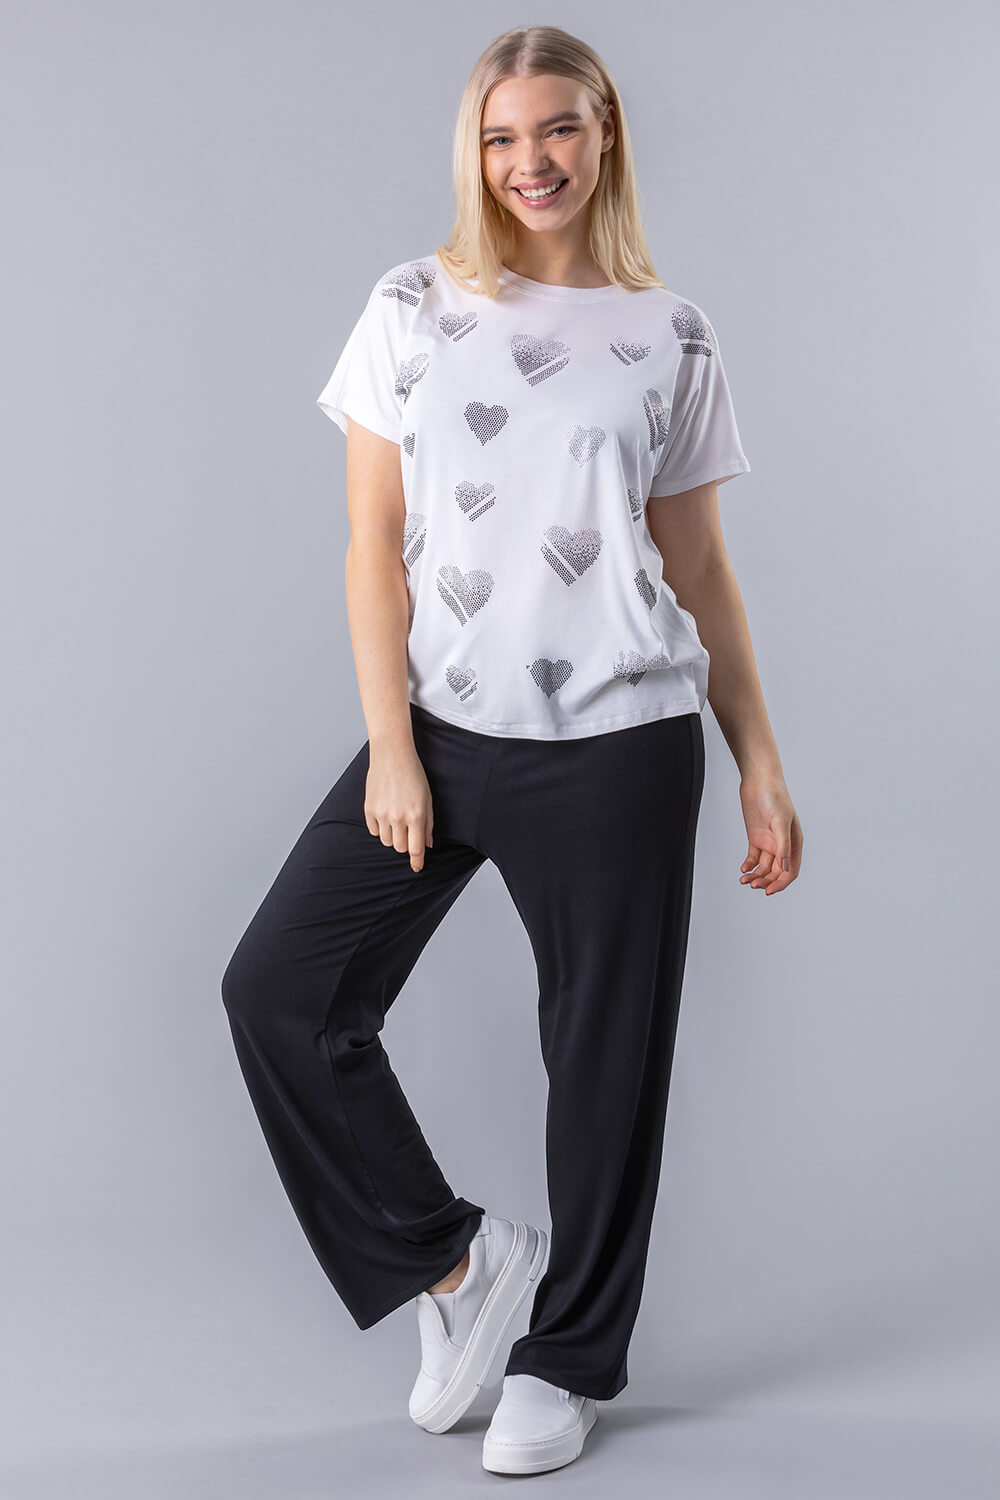 White Embellished Heart Lounge Top, Image 4 of 4